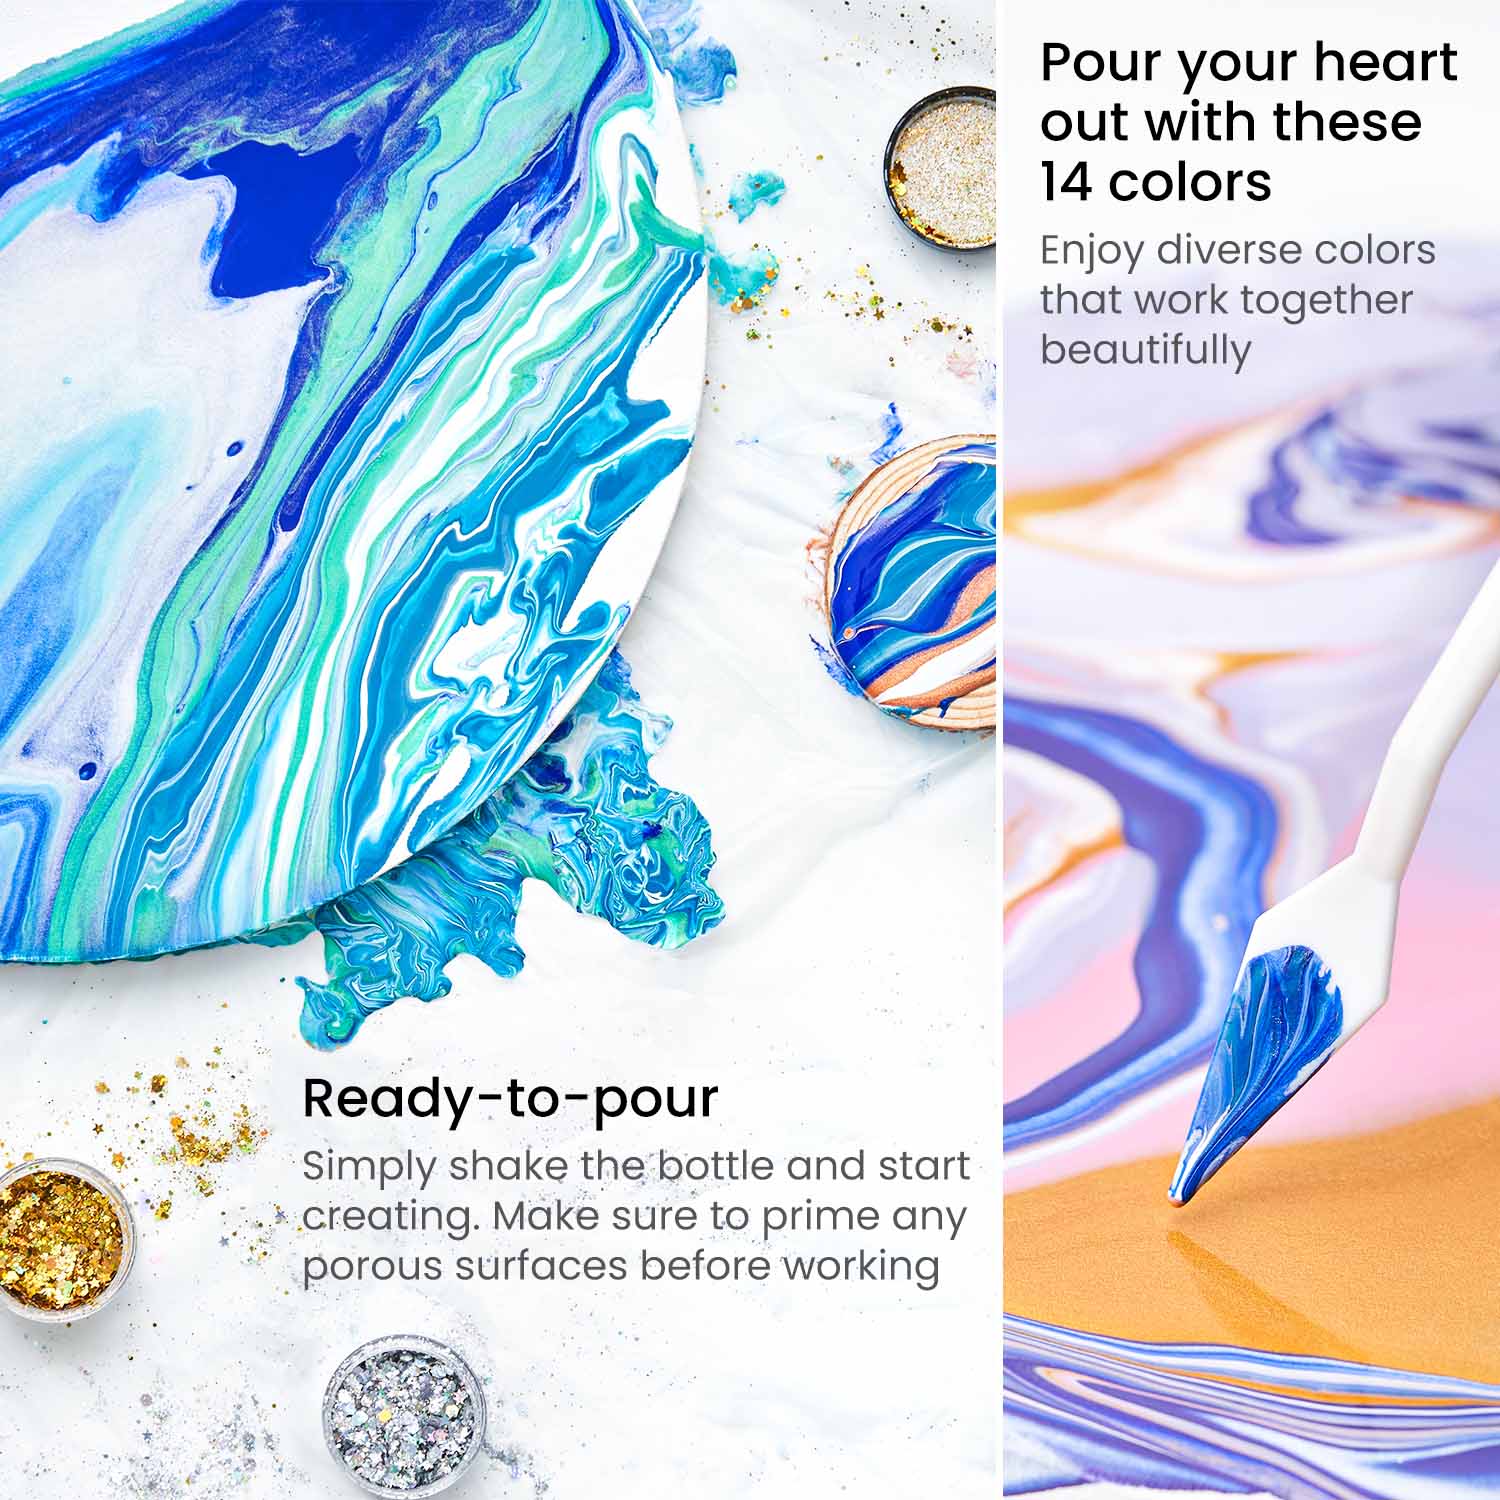 Acrylic Pouring Paint –